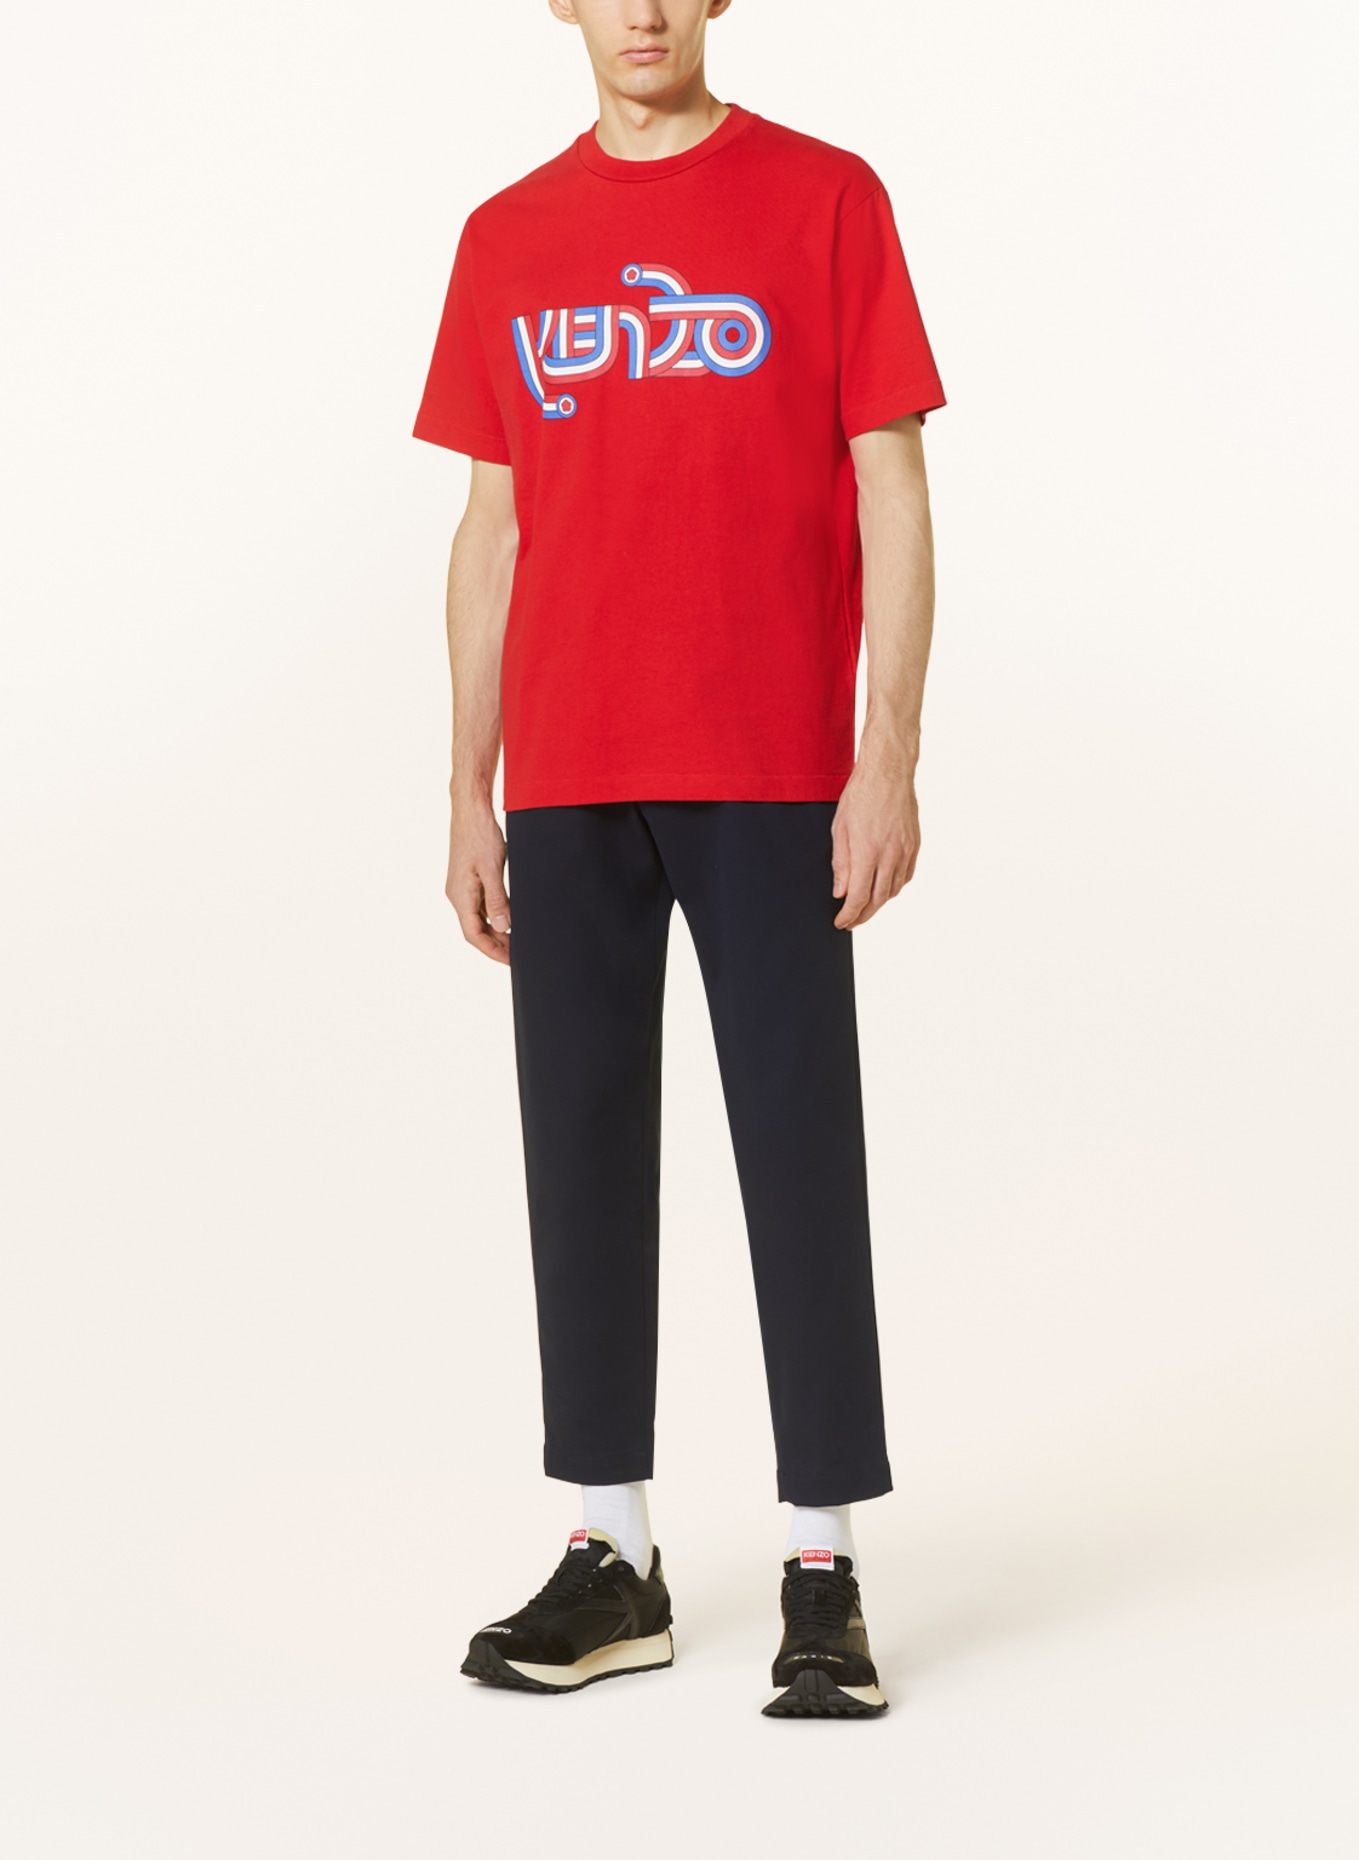 KENZO T-shirt, Color: RED (Image 2)